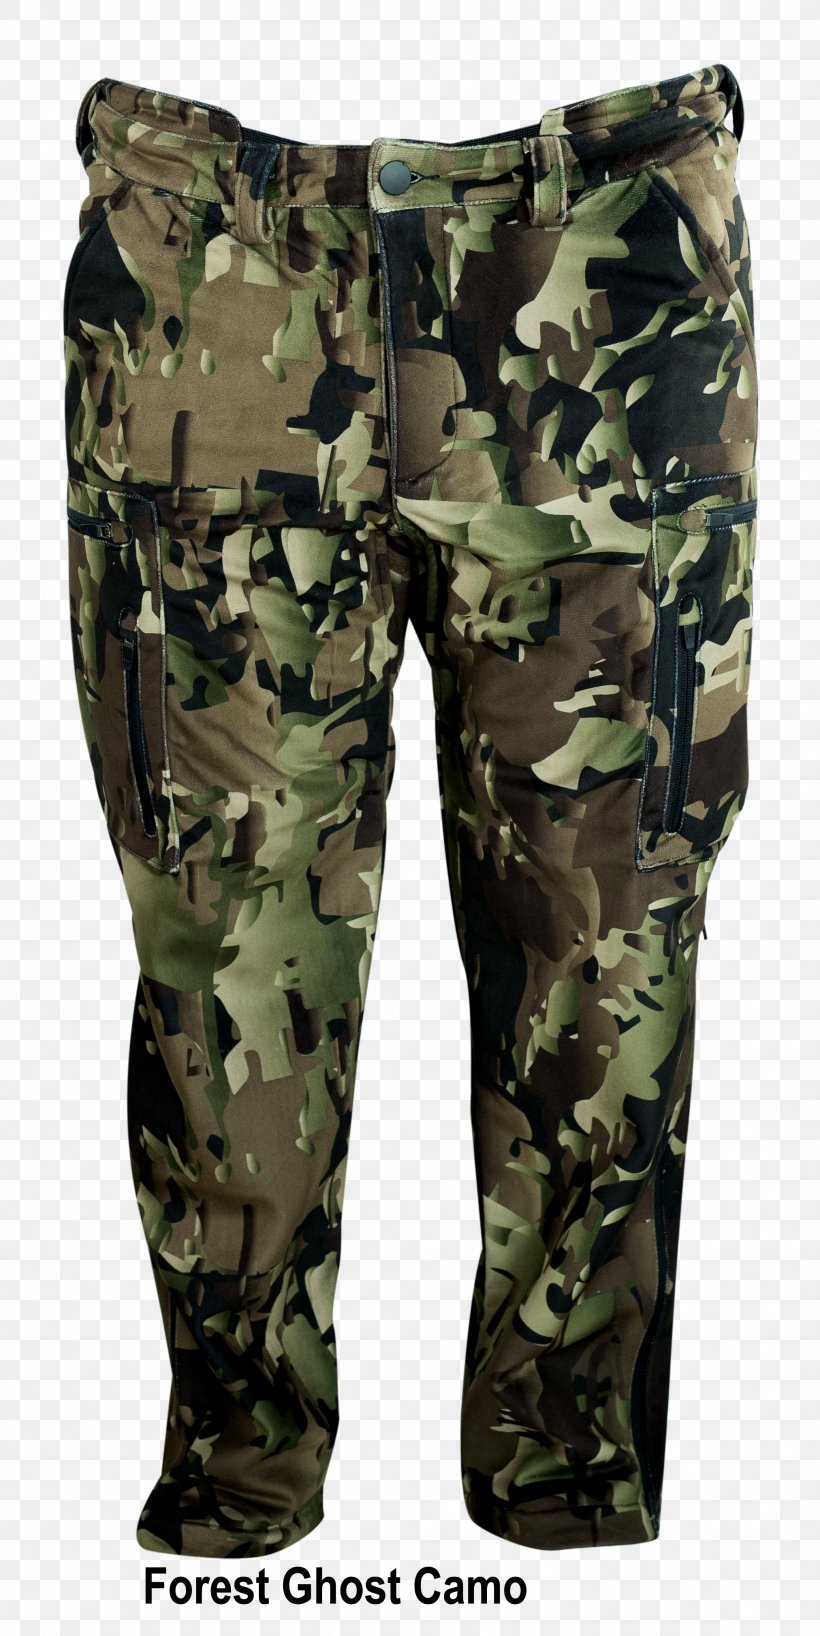 Cargo Pants Khaki Military Camouflage, PNG, 2024x4040px, Cargo Pants, Camouflage, Cargo, Khaki, Military Camouflage Download Free